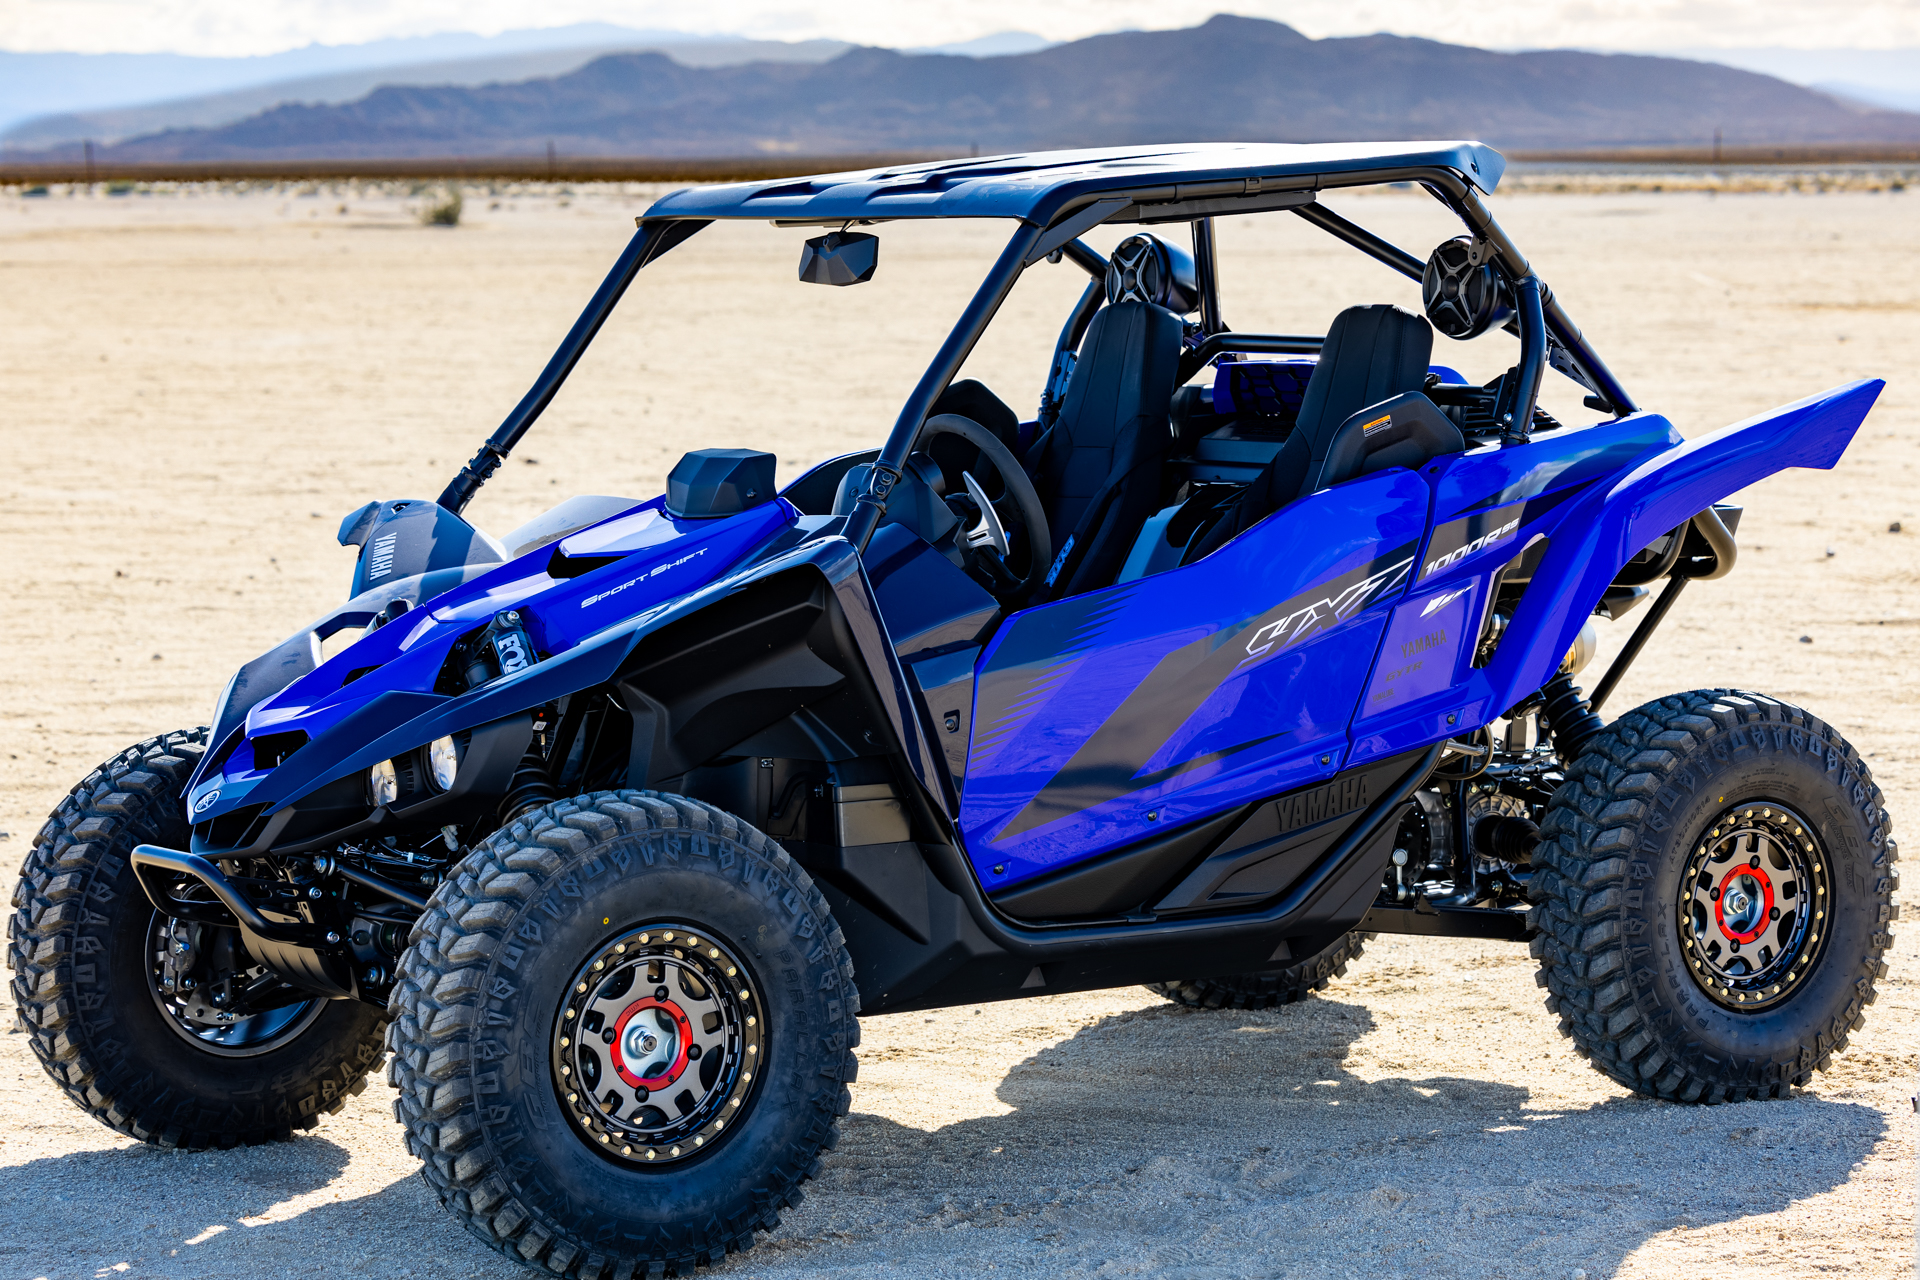 Yamaha equipped the Turbocharged YXZ we tested with 30” GBC Parallax tires on KMC beadlock wheels. They put the power down very well in the dry landscape of Superstition, California.